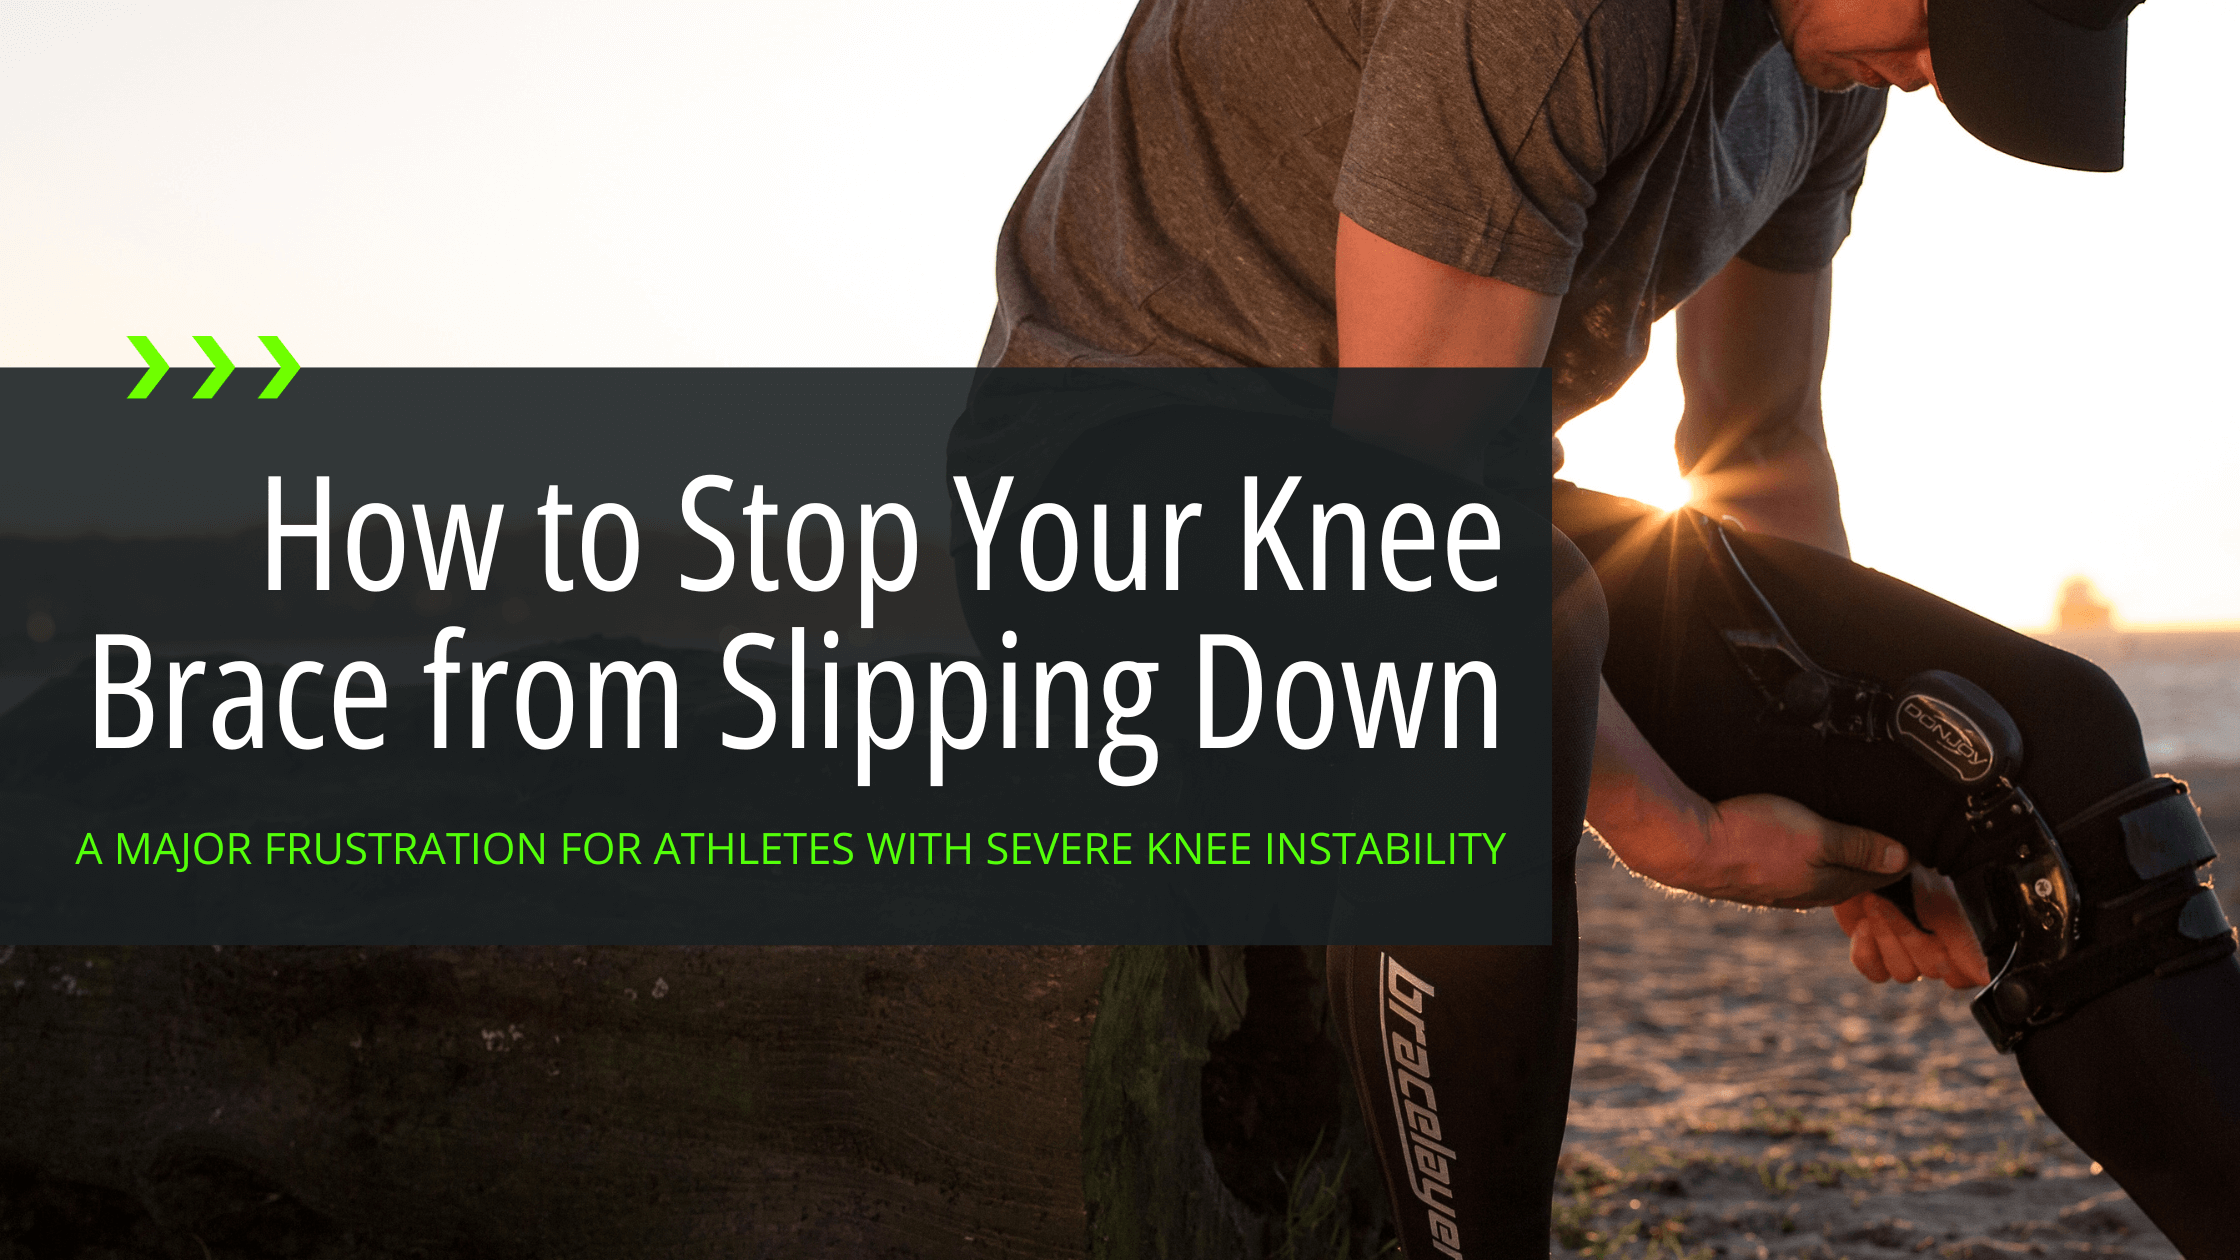 How to Stop Your Knee Brace from Slipping Down ACL, ACL brace, Brace Slipping, Distal Migration, Knee Brace, Knee Compression, zimmer splint knee, Bracelayer® USA | Knee Compression Gear